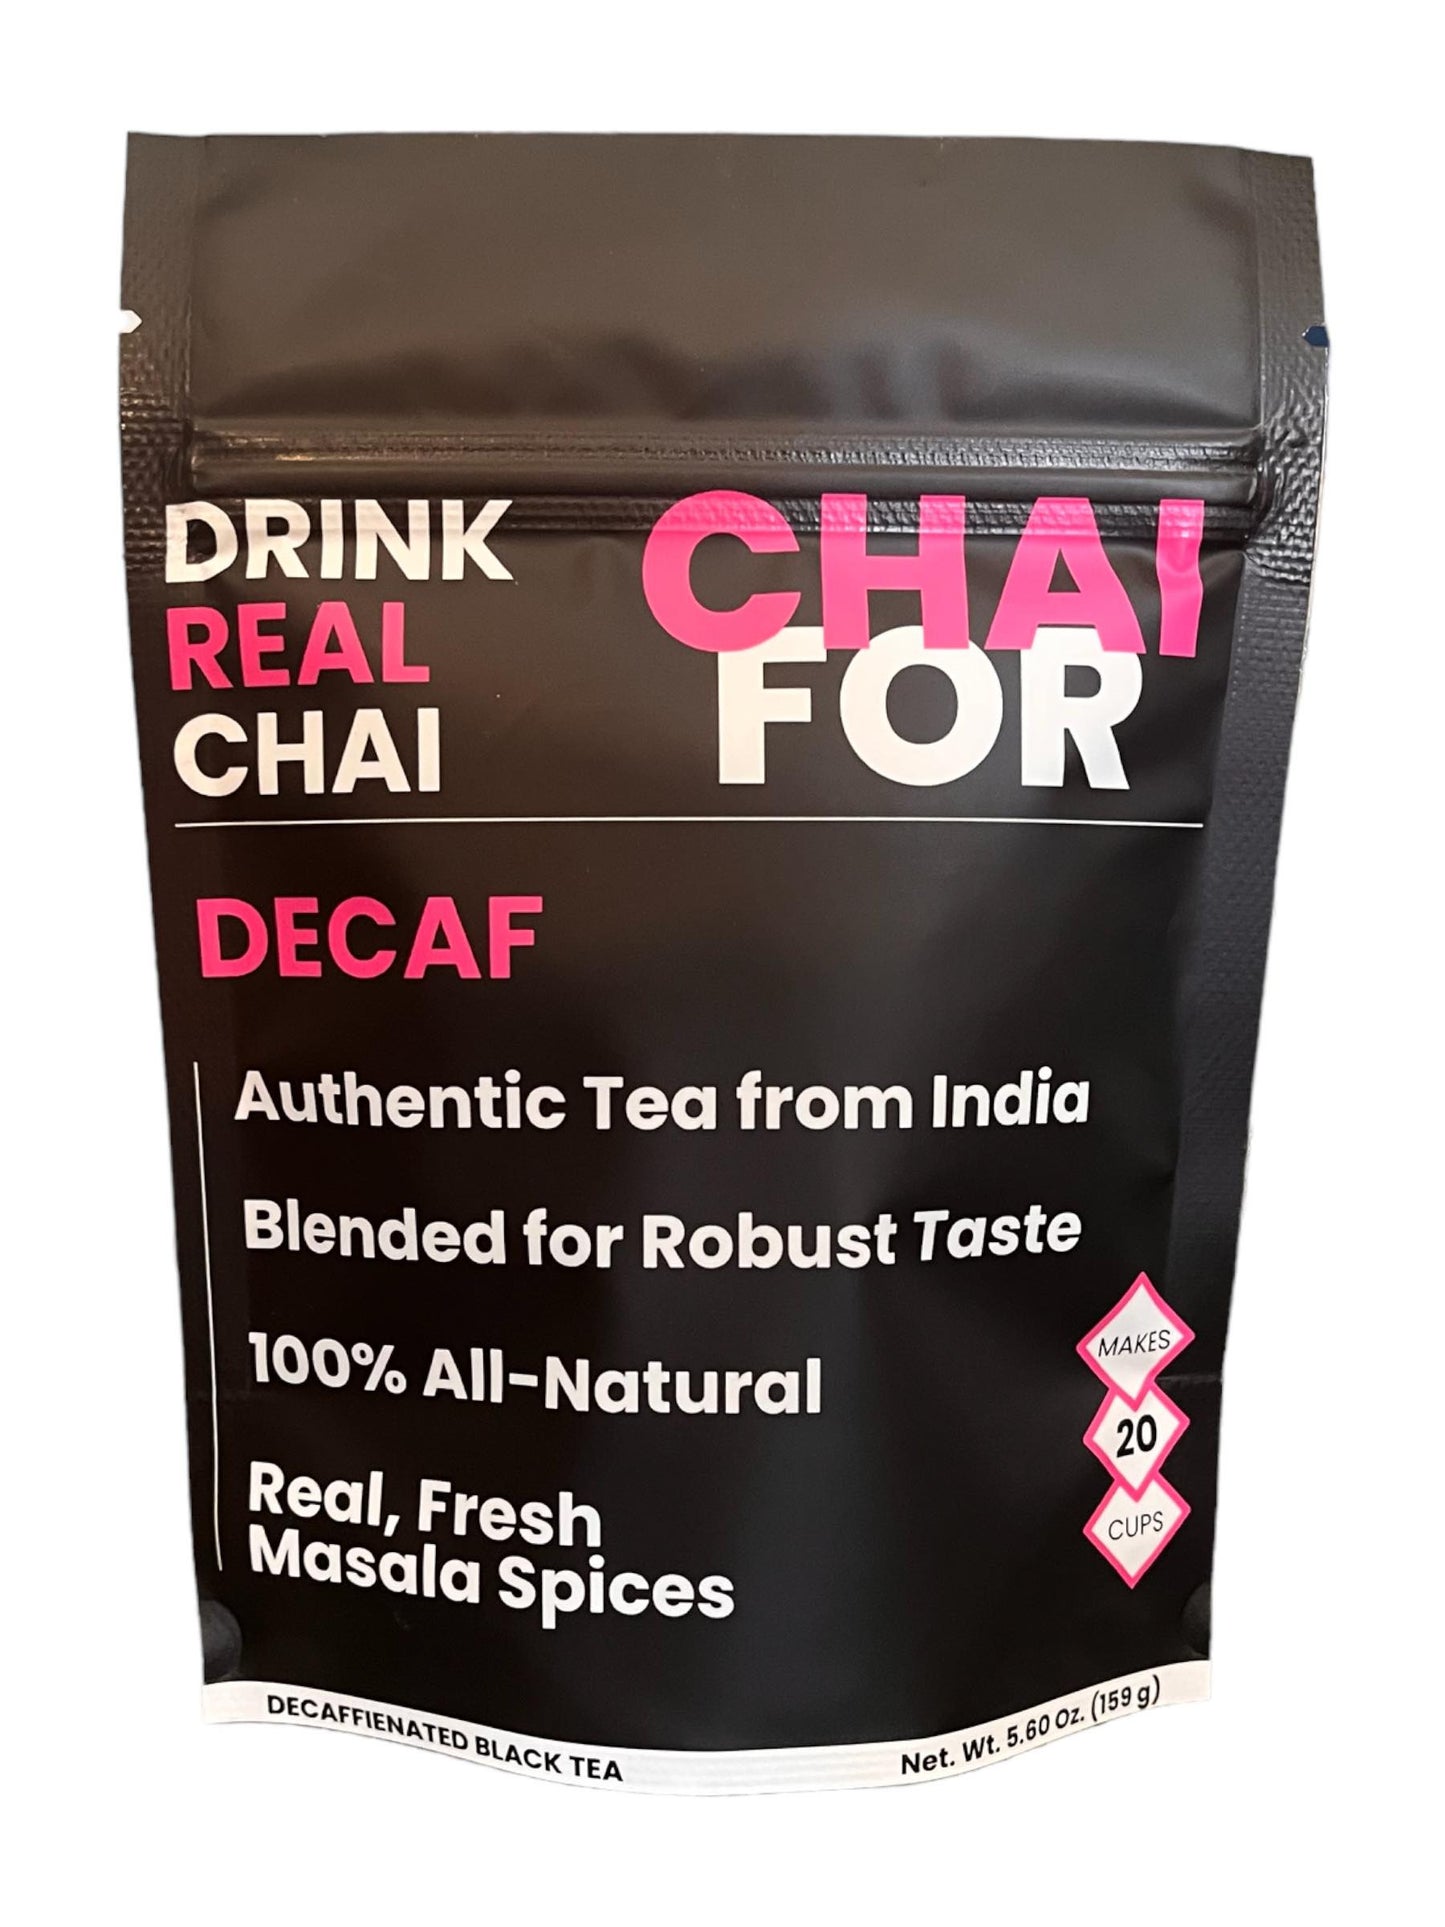 Decaf Chai Packaging showing special features of the chai.